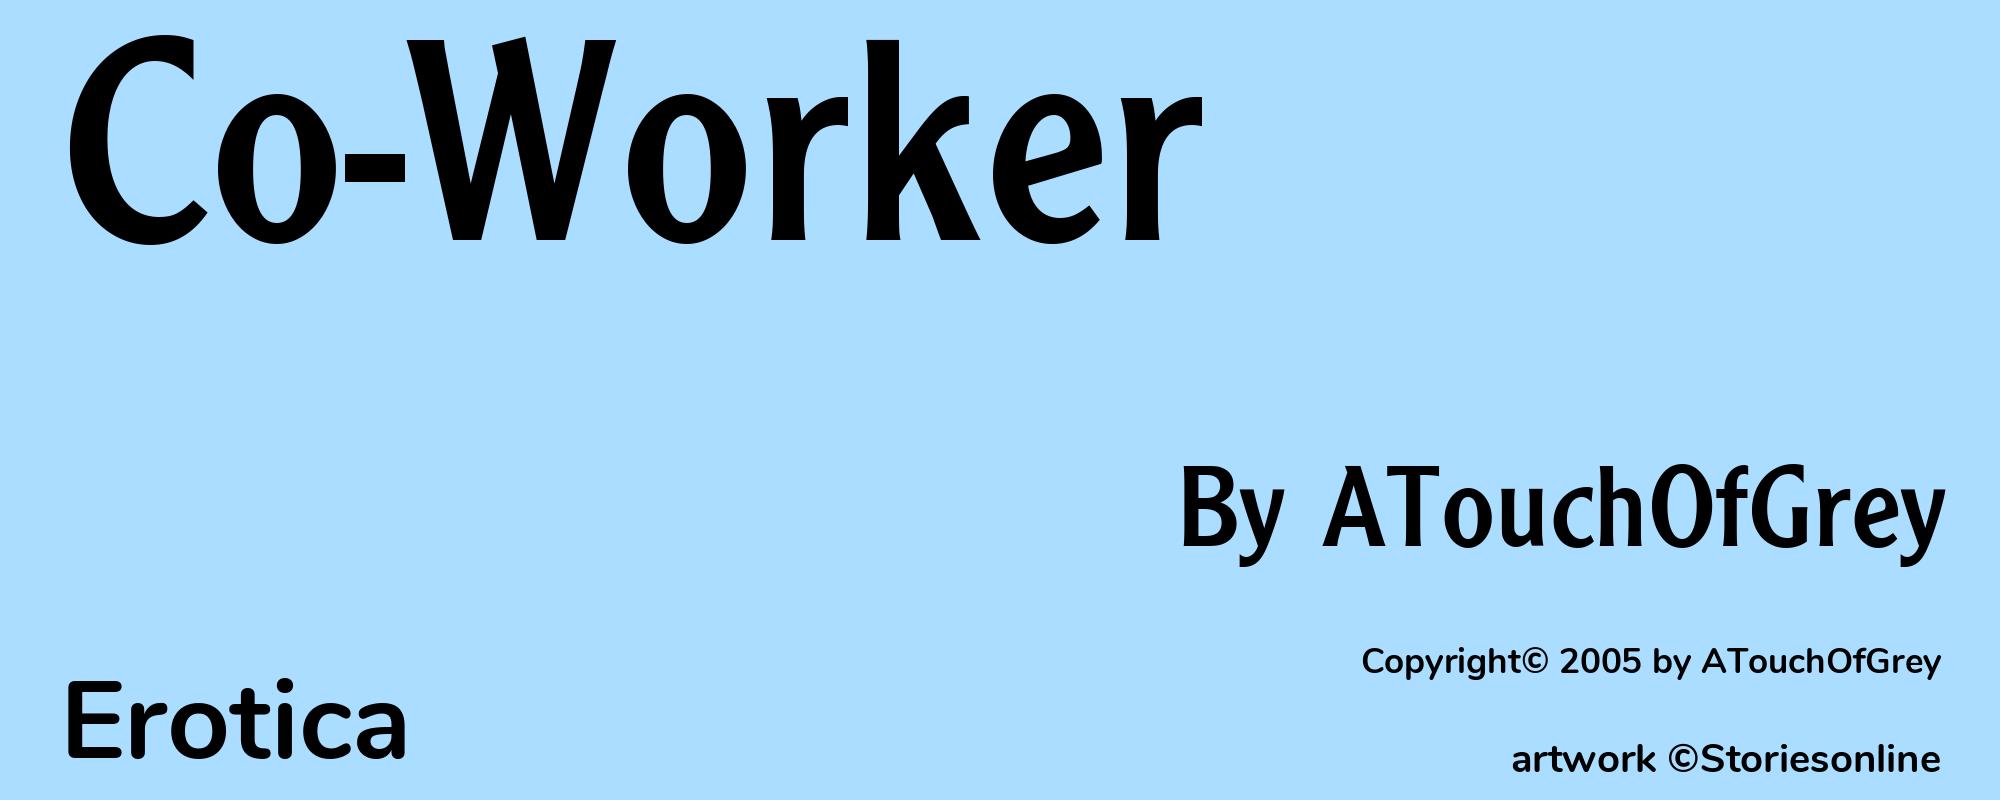 Co-Worker - Cover